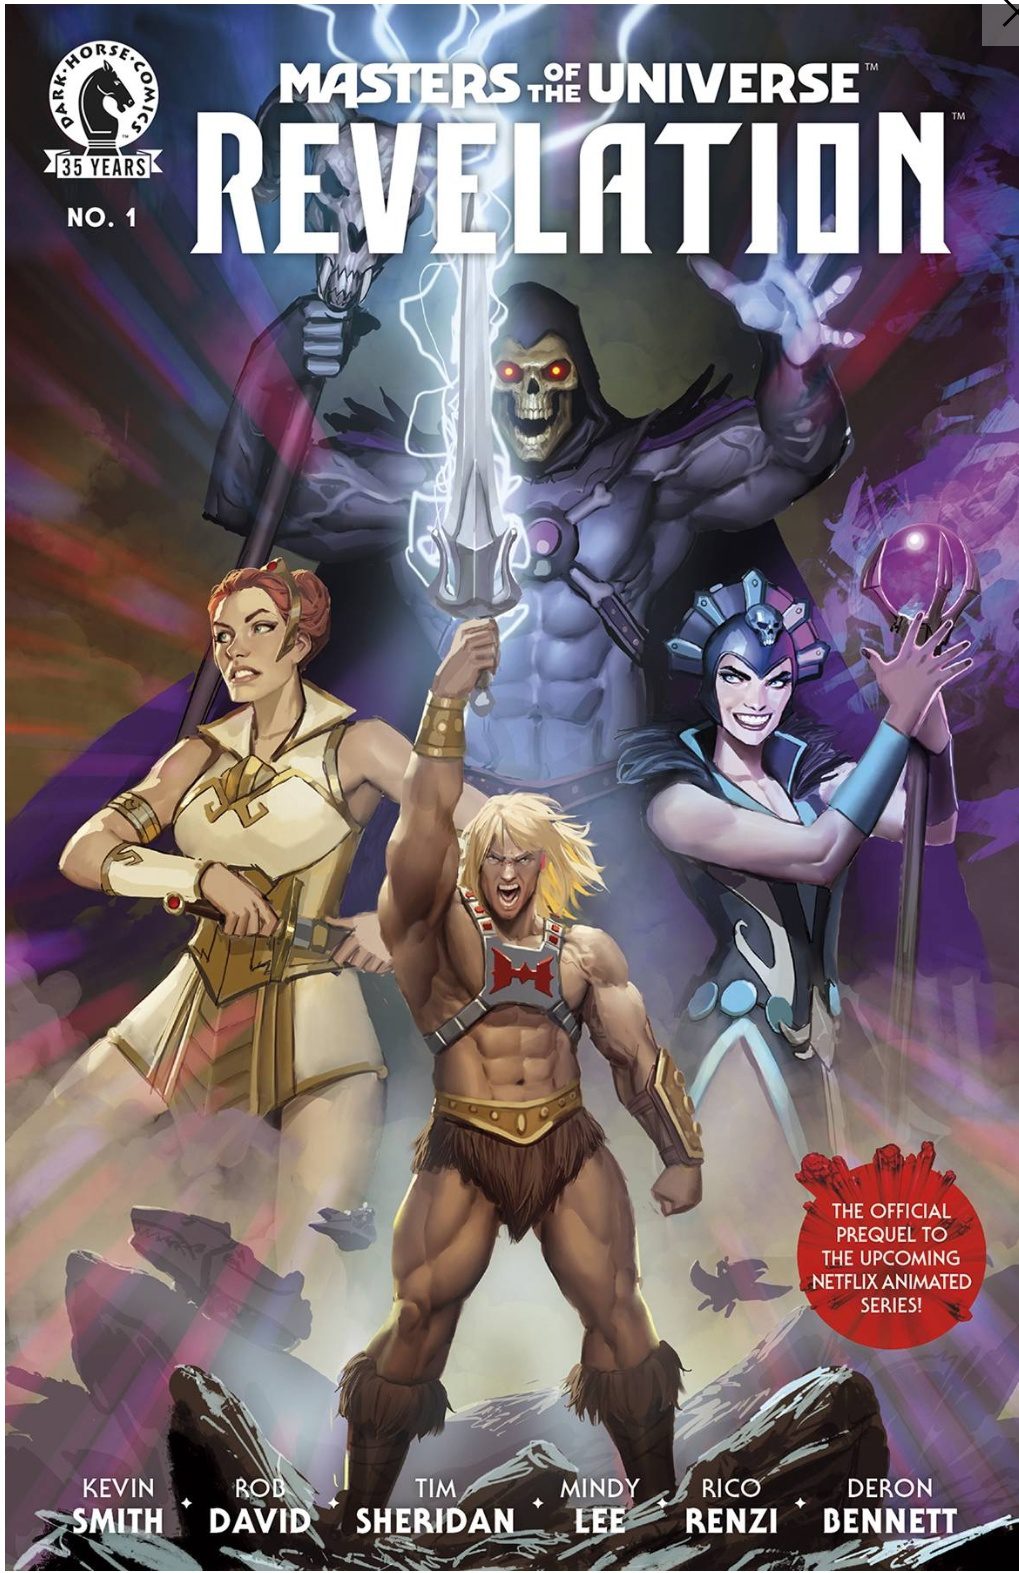 Masters of the Universe: Revelation # 1 Cover Art